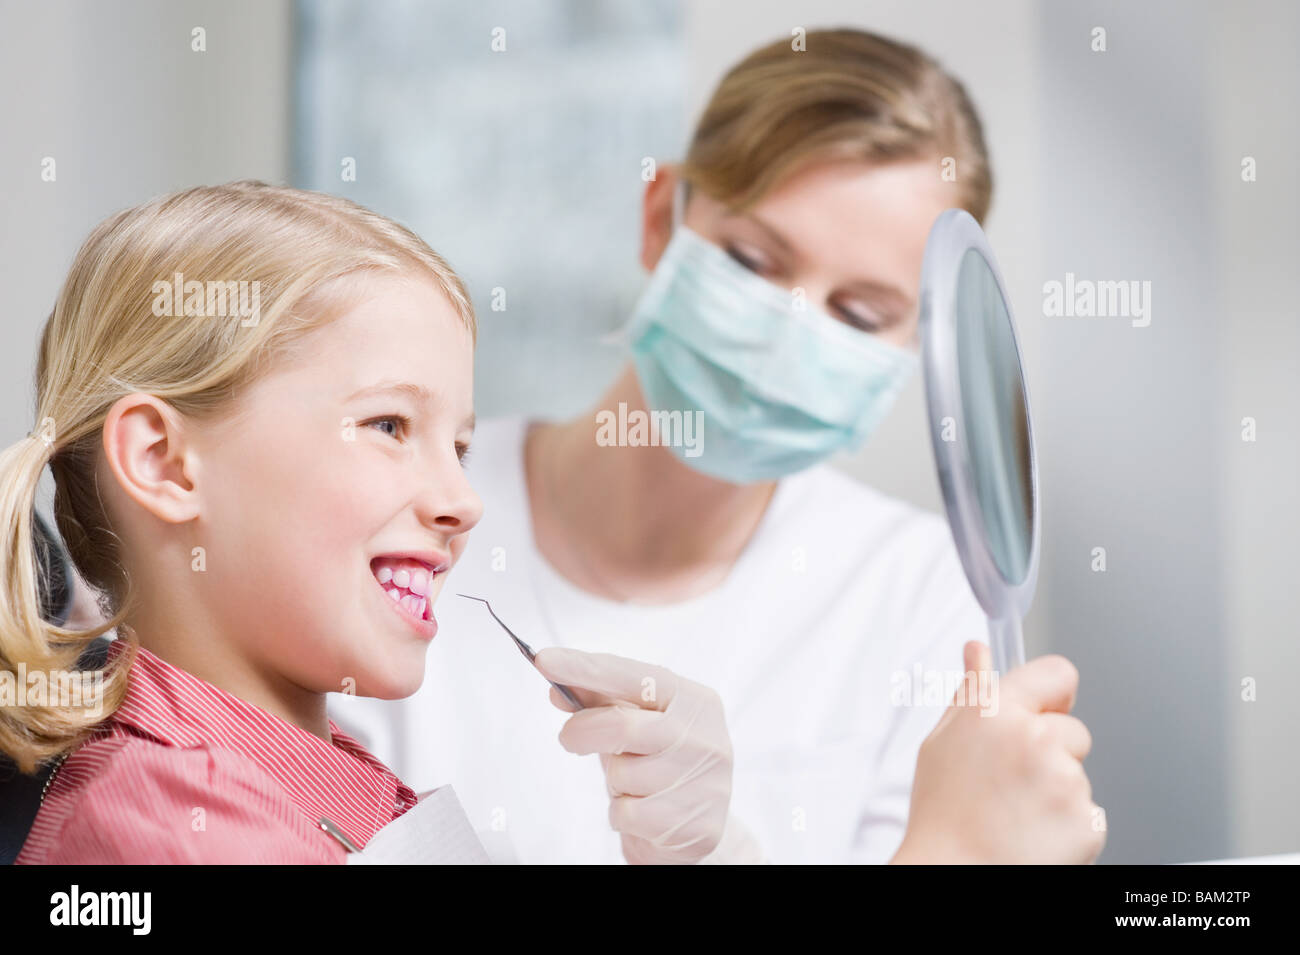 Girl and dental hygienist Stock Photo